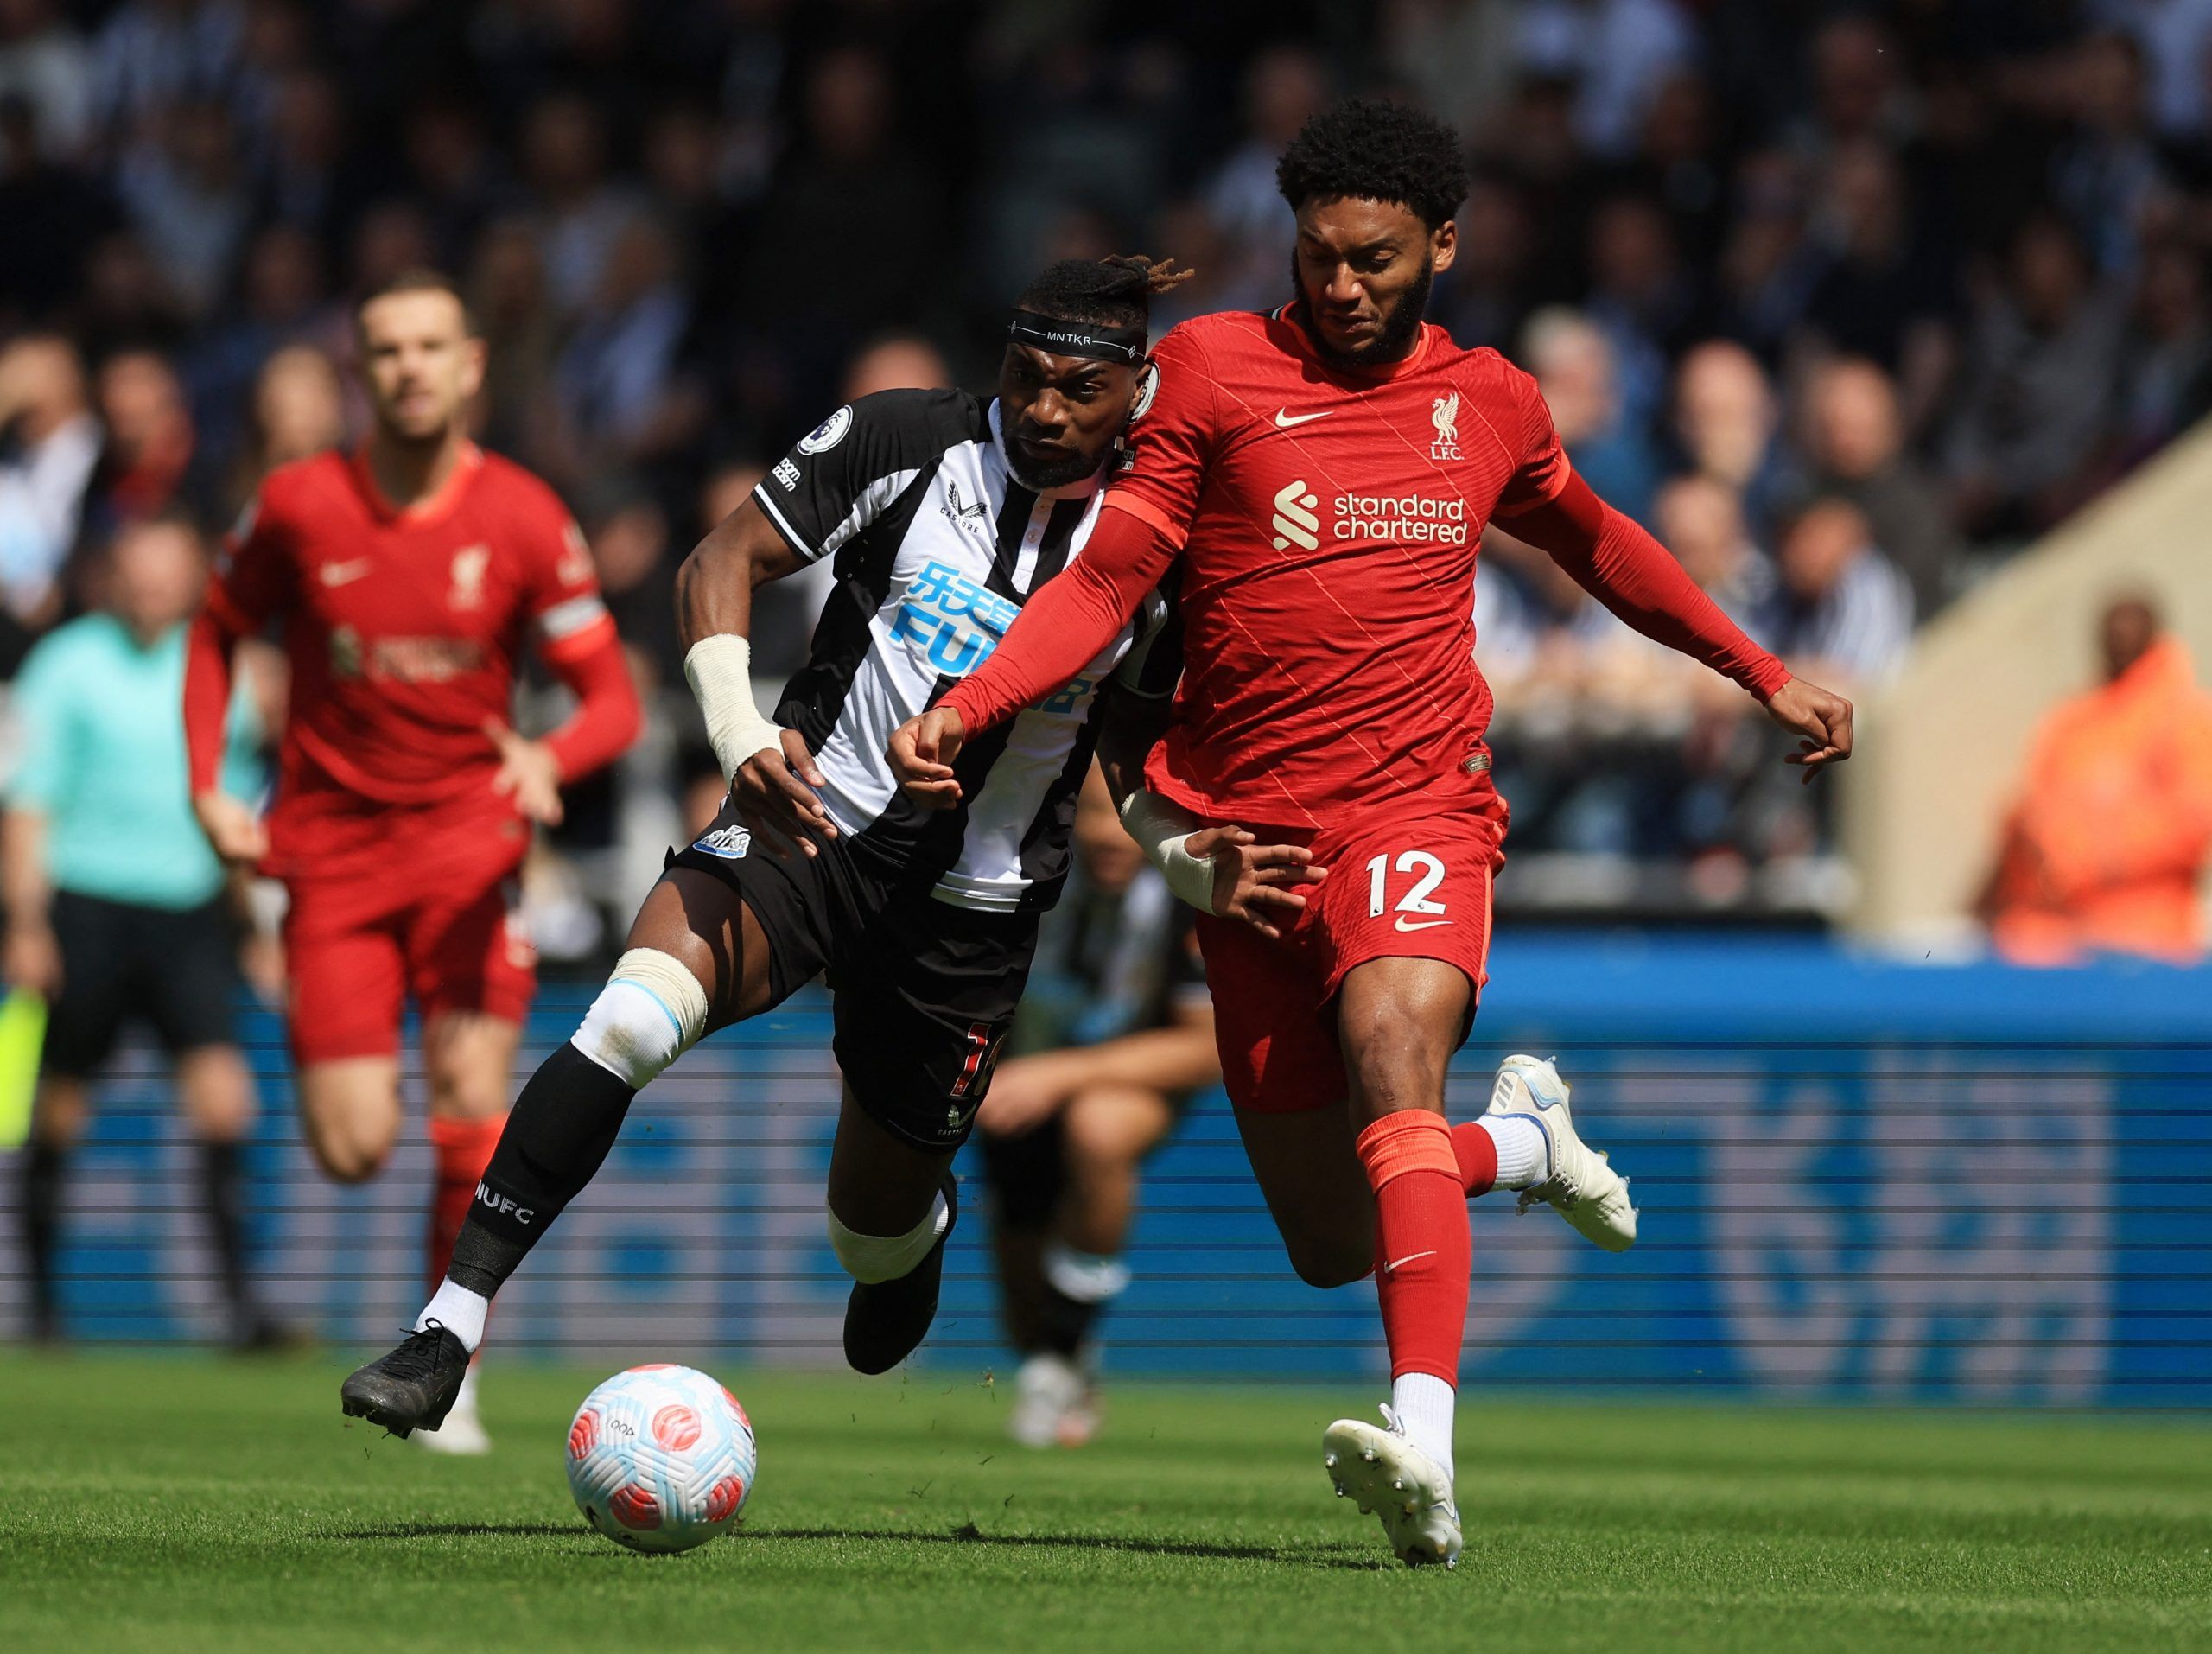 Soccer Football - Premier League - Newcastle United v Liverpool - St James' Park, Newcastle, Britain - April 30, 2022 Newcastle United's Allan Saint-Maximin in action with Liverpool's Joe Gomez Action Images via Reuters/Lee Smith EDITORIAL USE ONLY. No use with unauthorized audio, video, data, fixture lists, club/league logos or 'live' services. Online in-match use limited to 75 images, no video emulation. No use in betting, games or single club /league/player publications.  Please contact your 